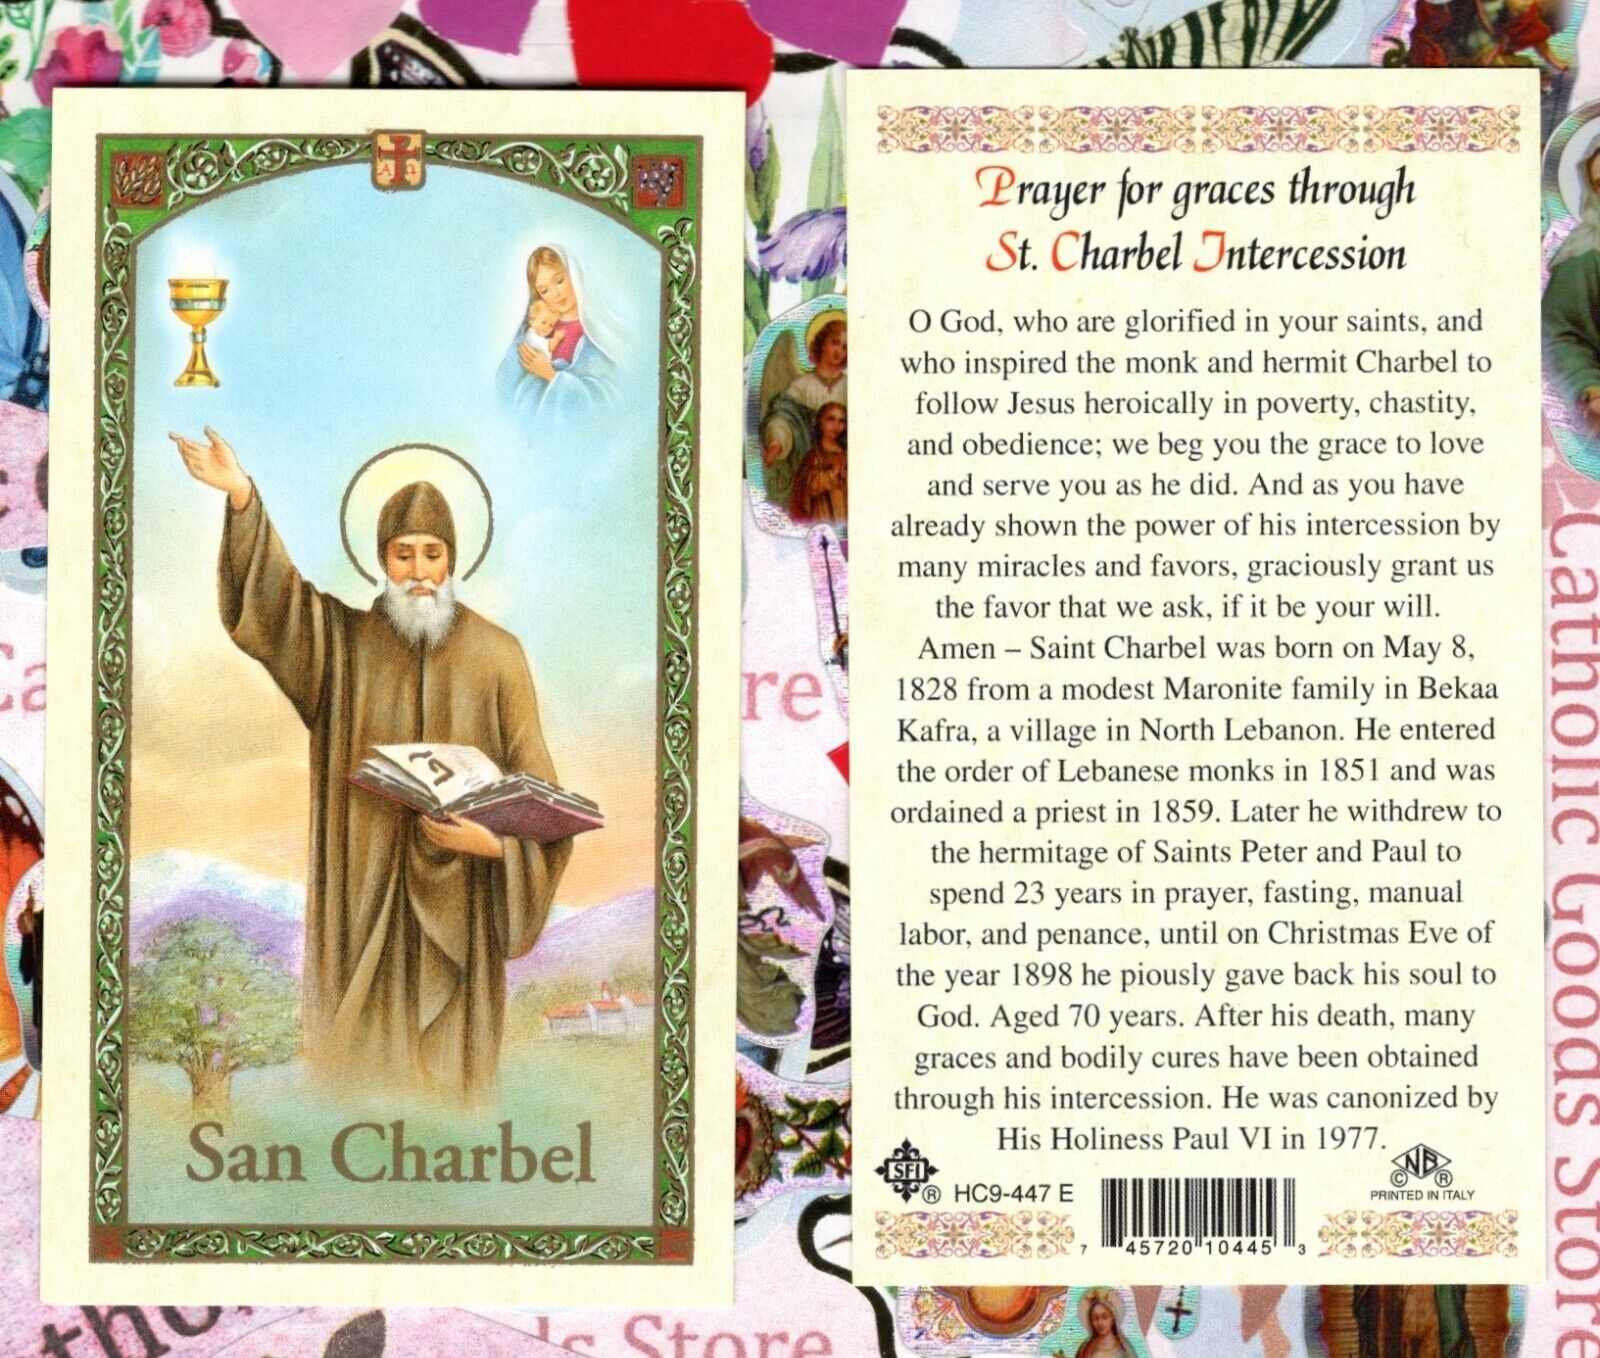 Prayer for Graces through St. Charbel Intercession - Paperstock Holy Card 447ENL